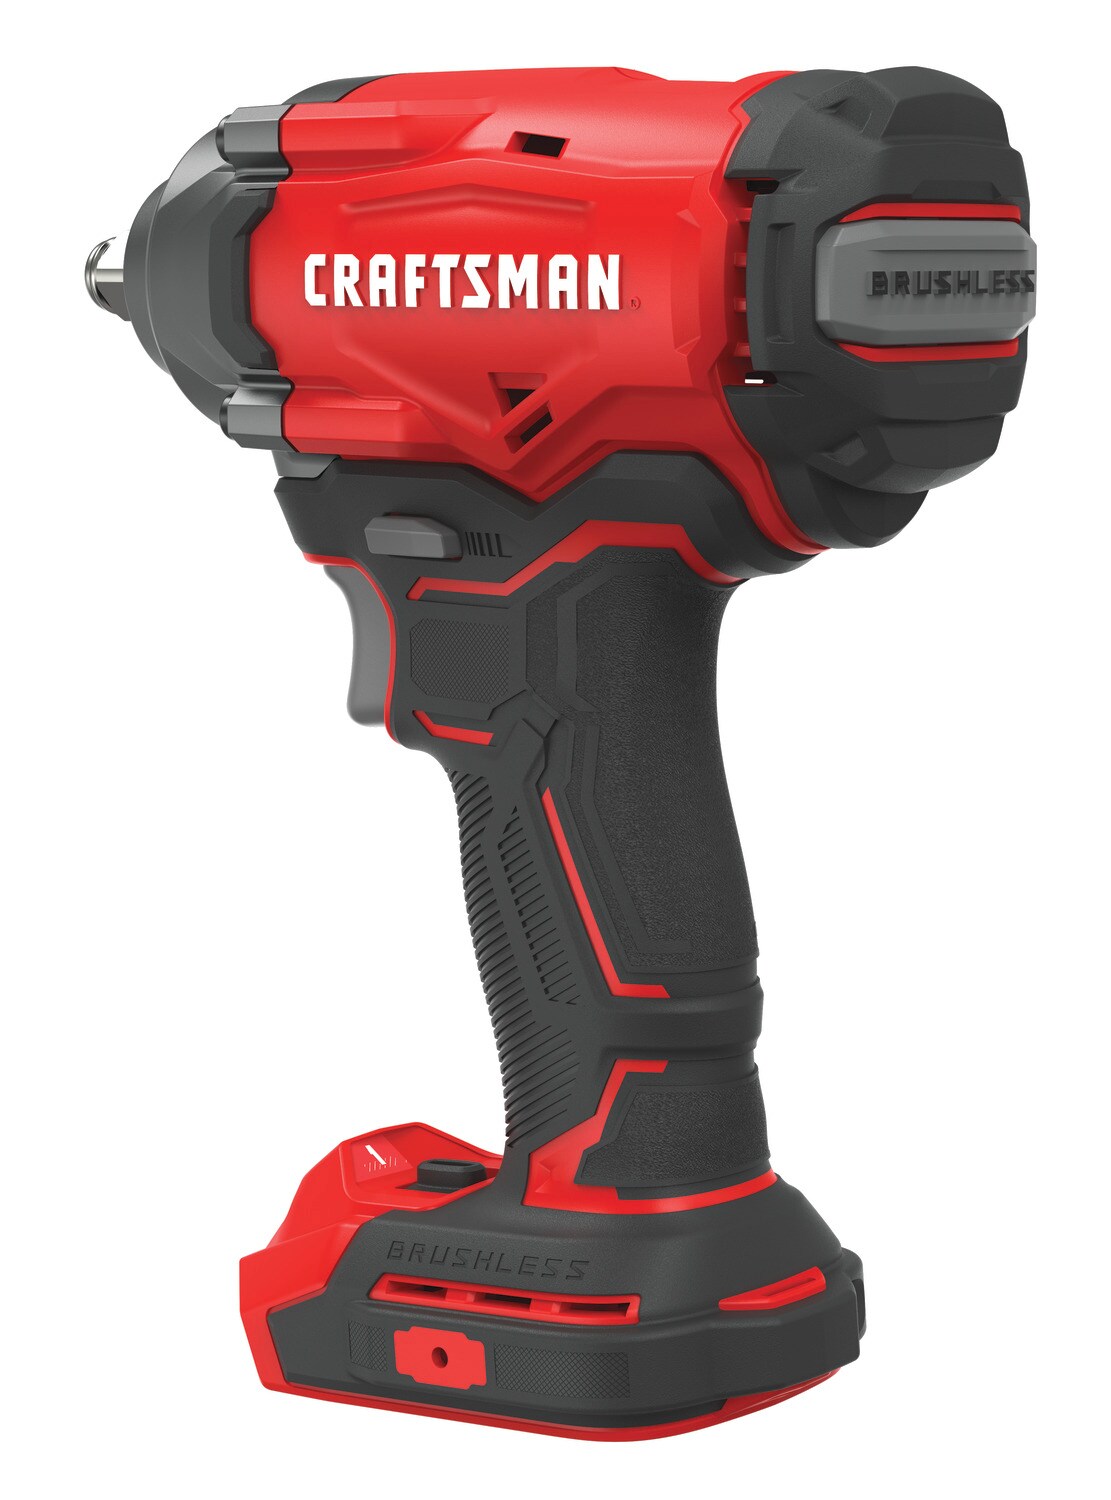 CRAFTSMAN V20 20-volt Max Variable Speed Brushless 1/2-in Drive